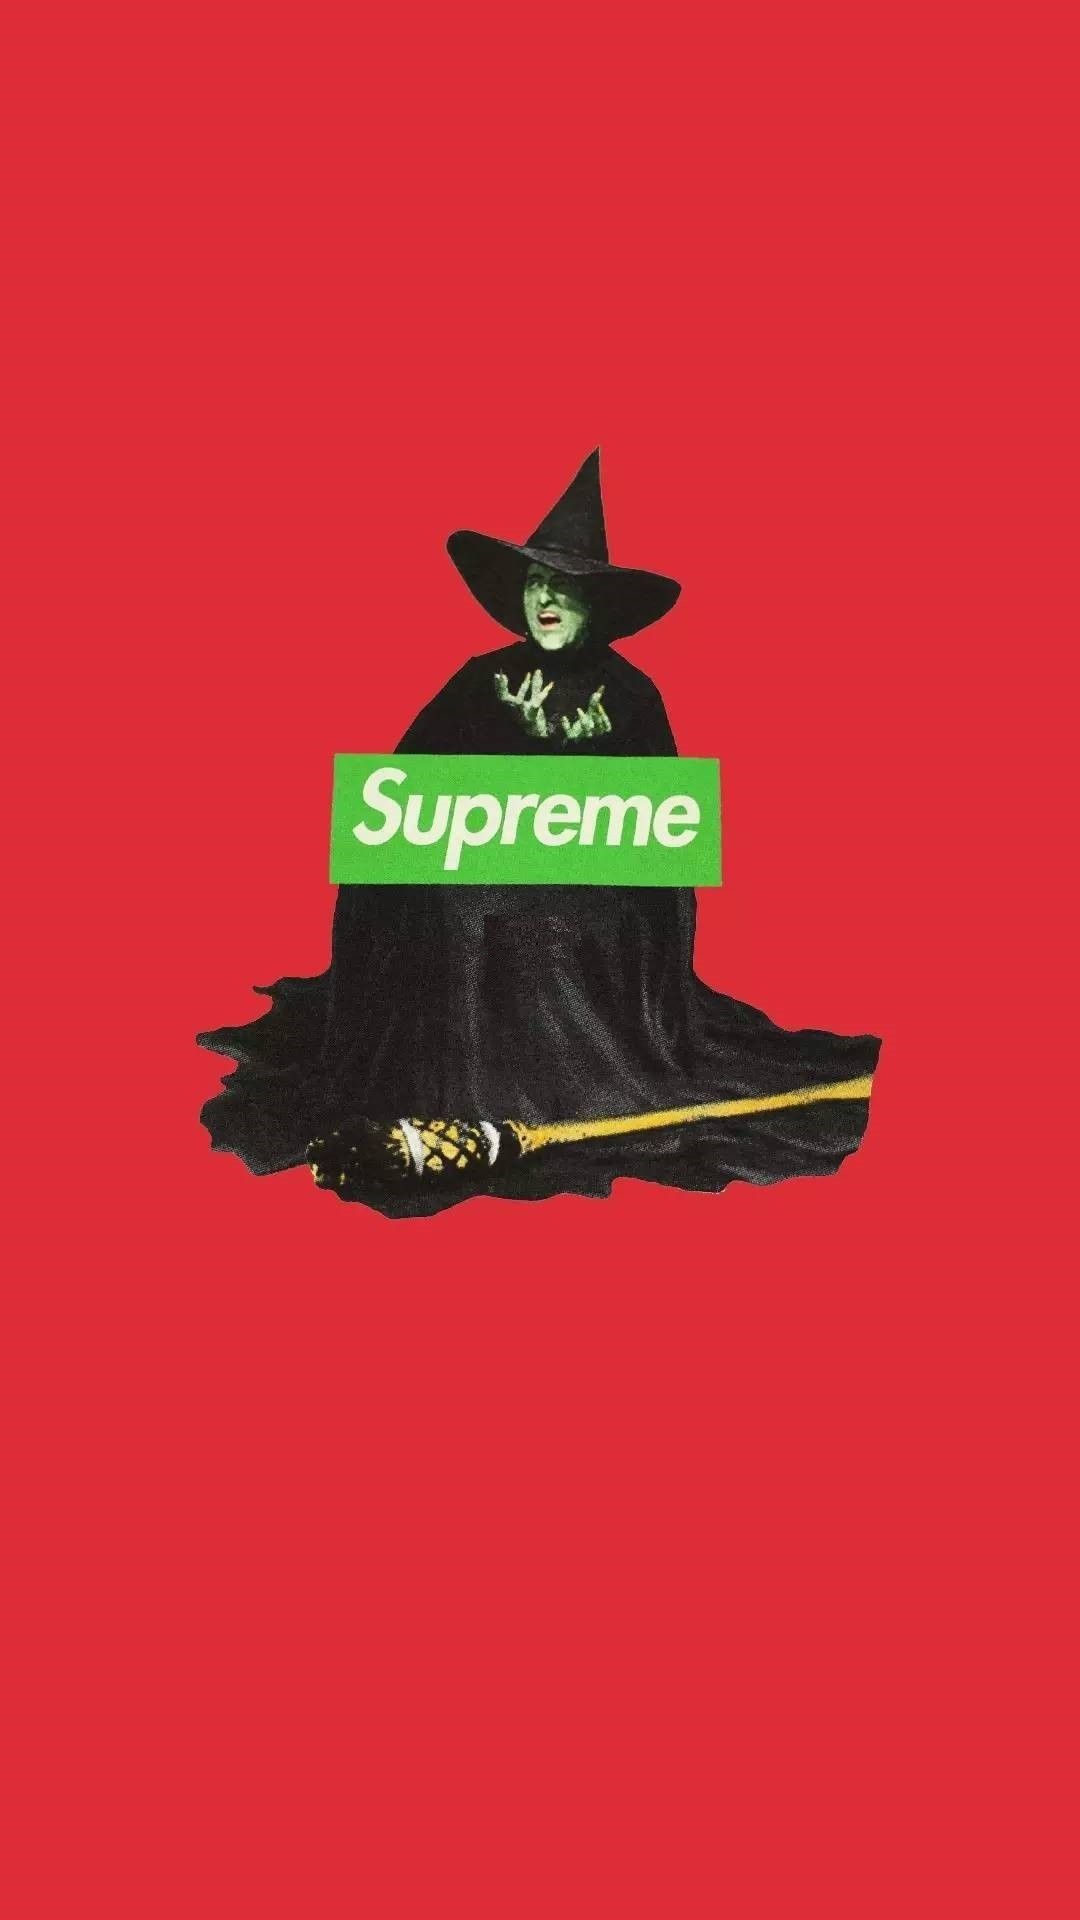 Supreme Wallpaper (the best image in 2018)